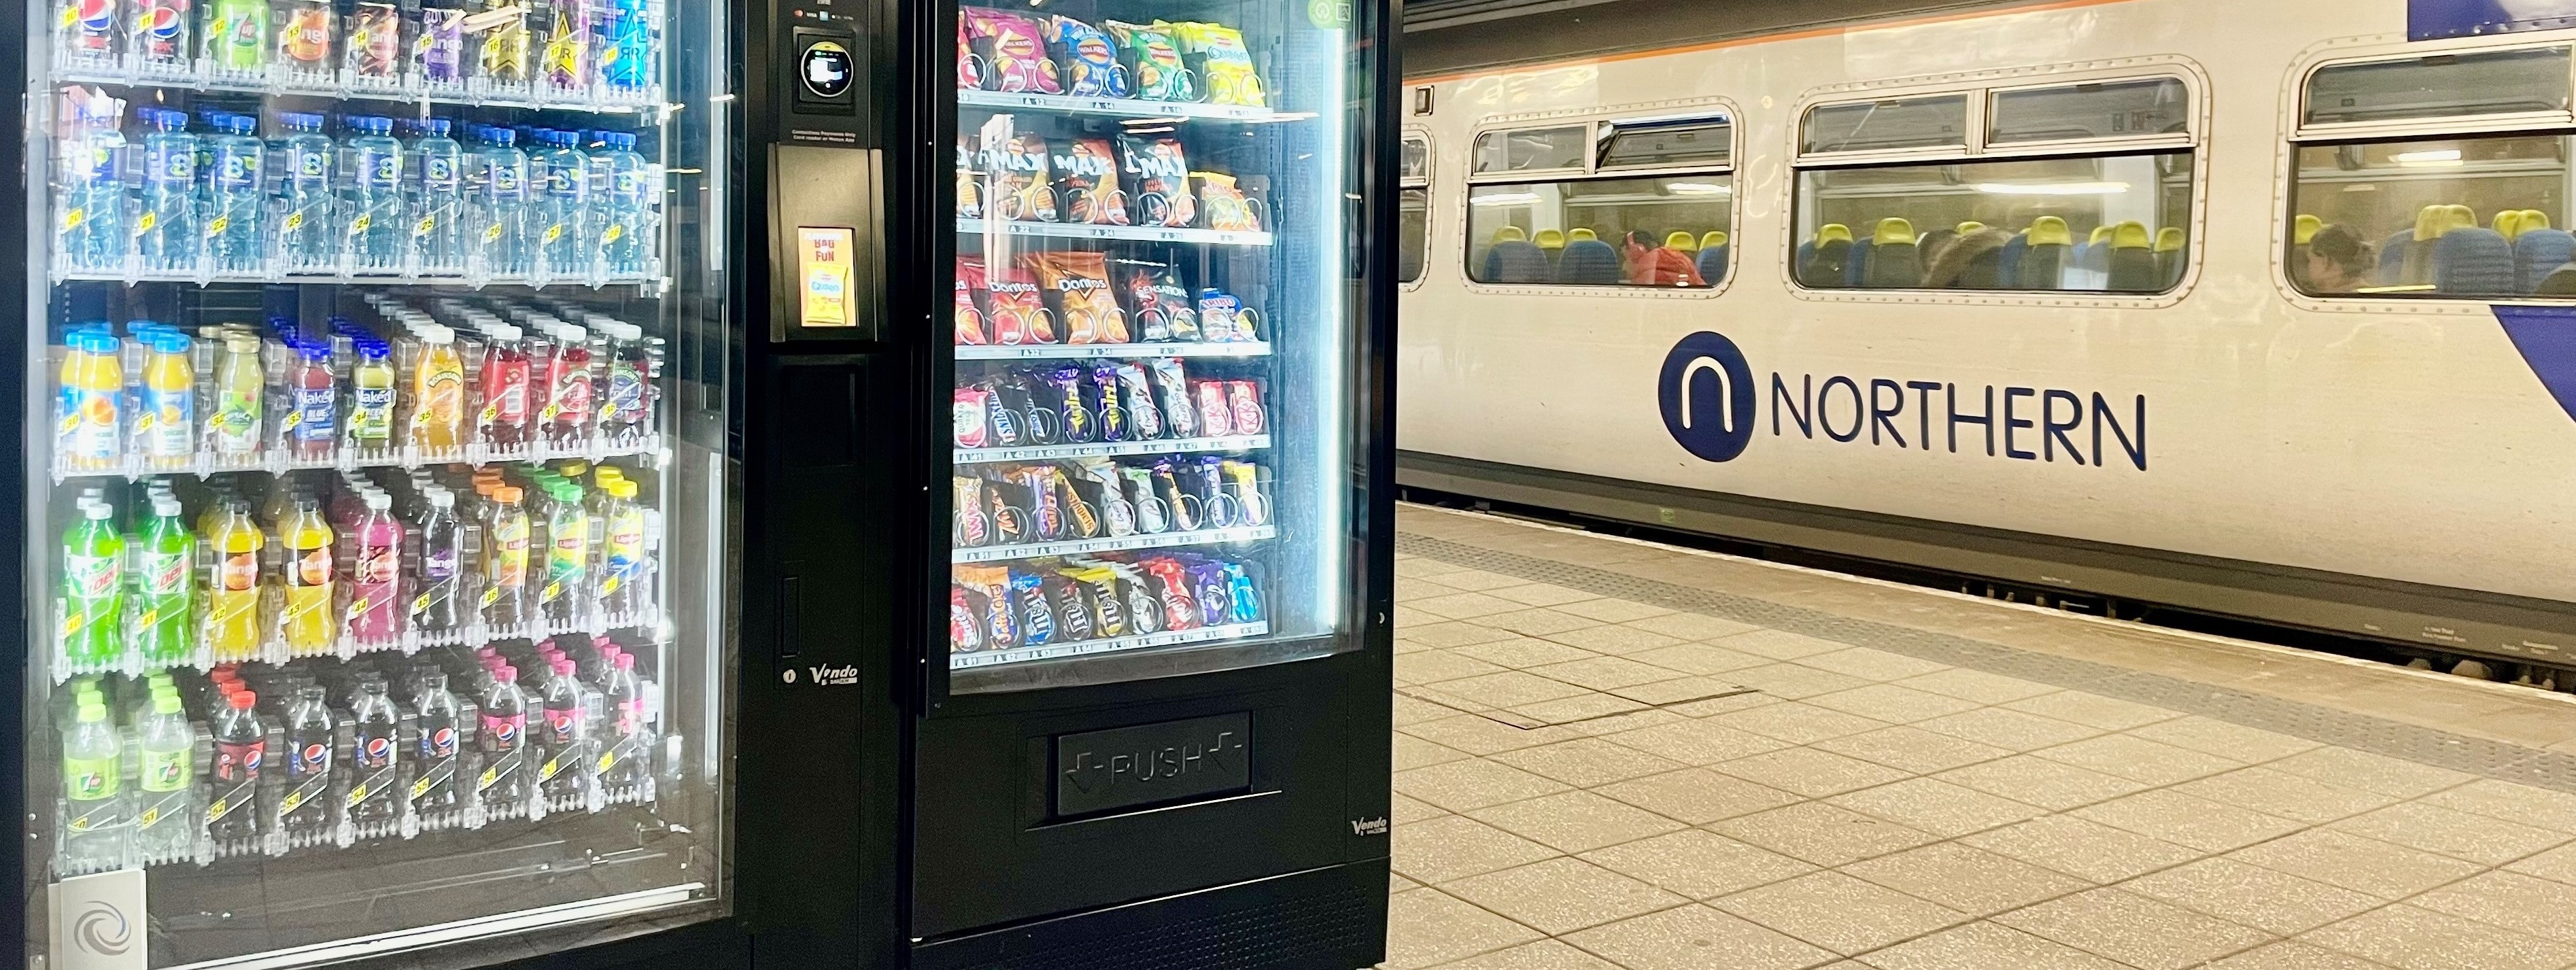 image-shows-vending-machine-on-platform-with-northern-service-2